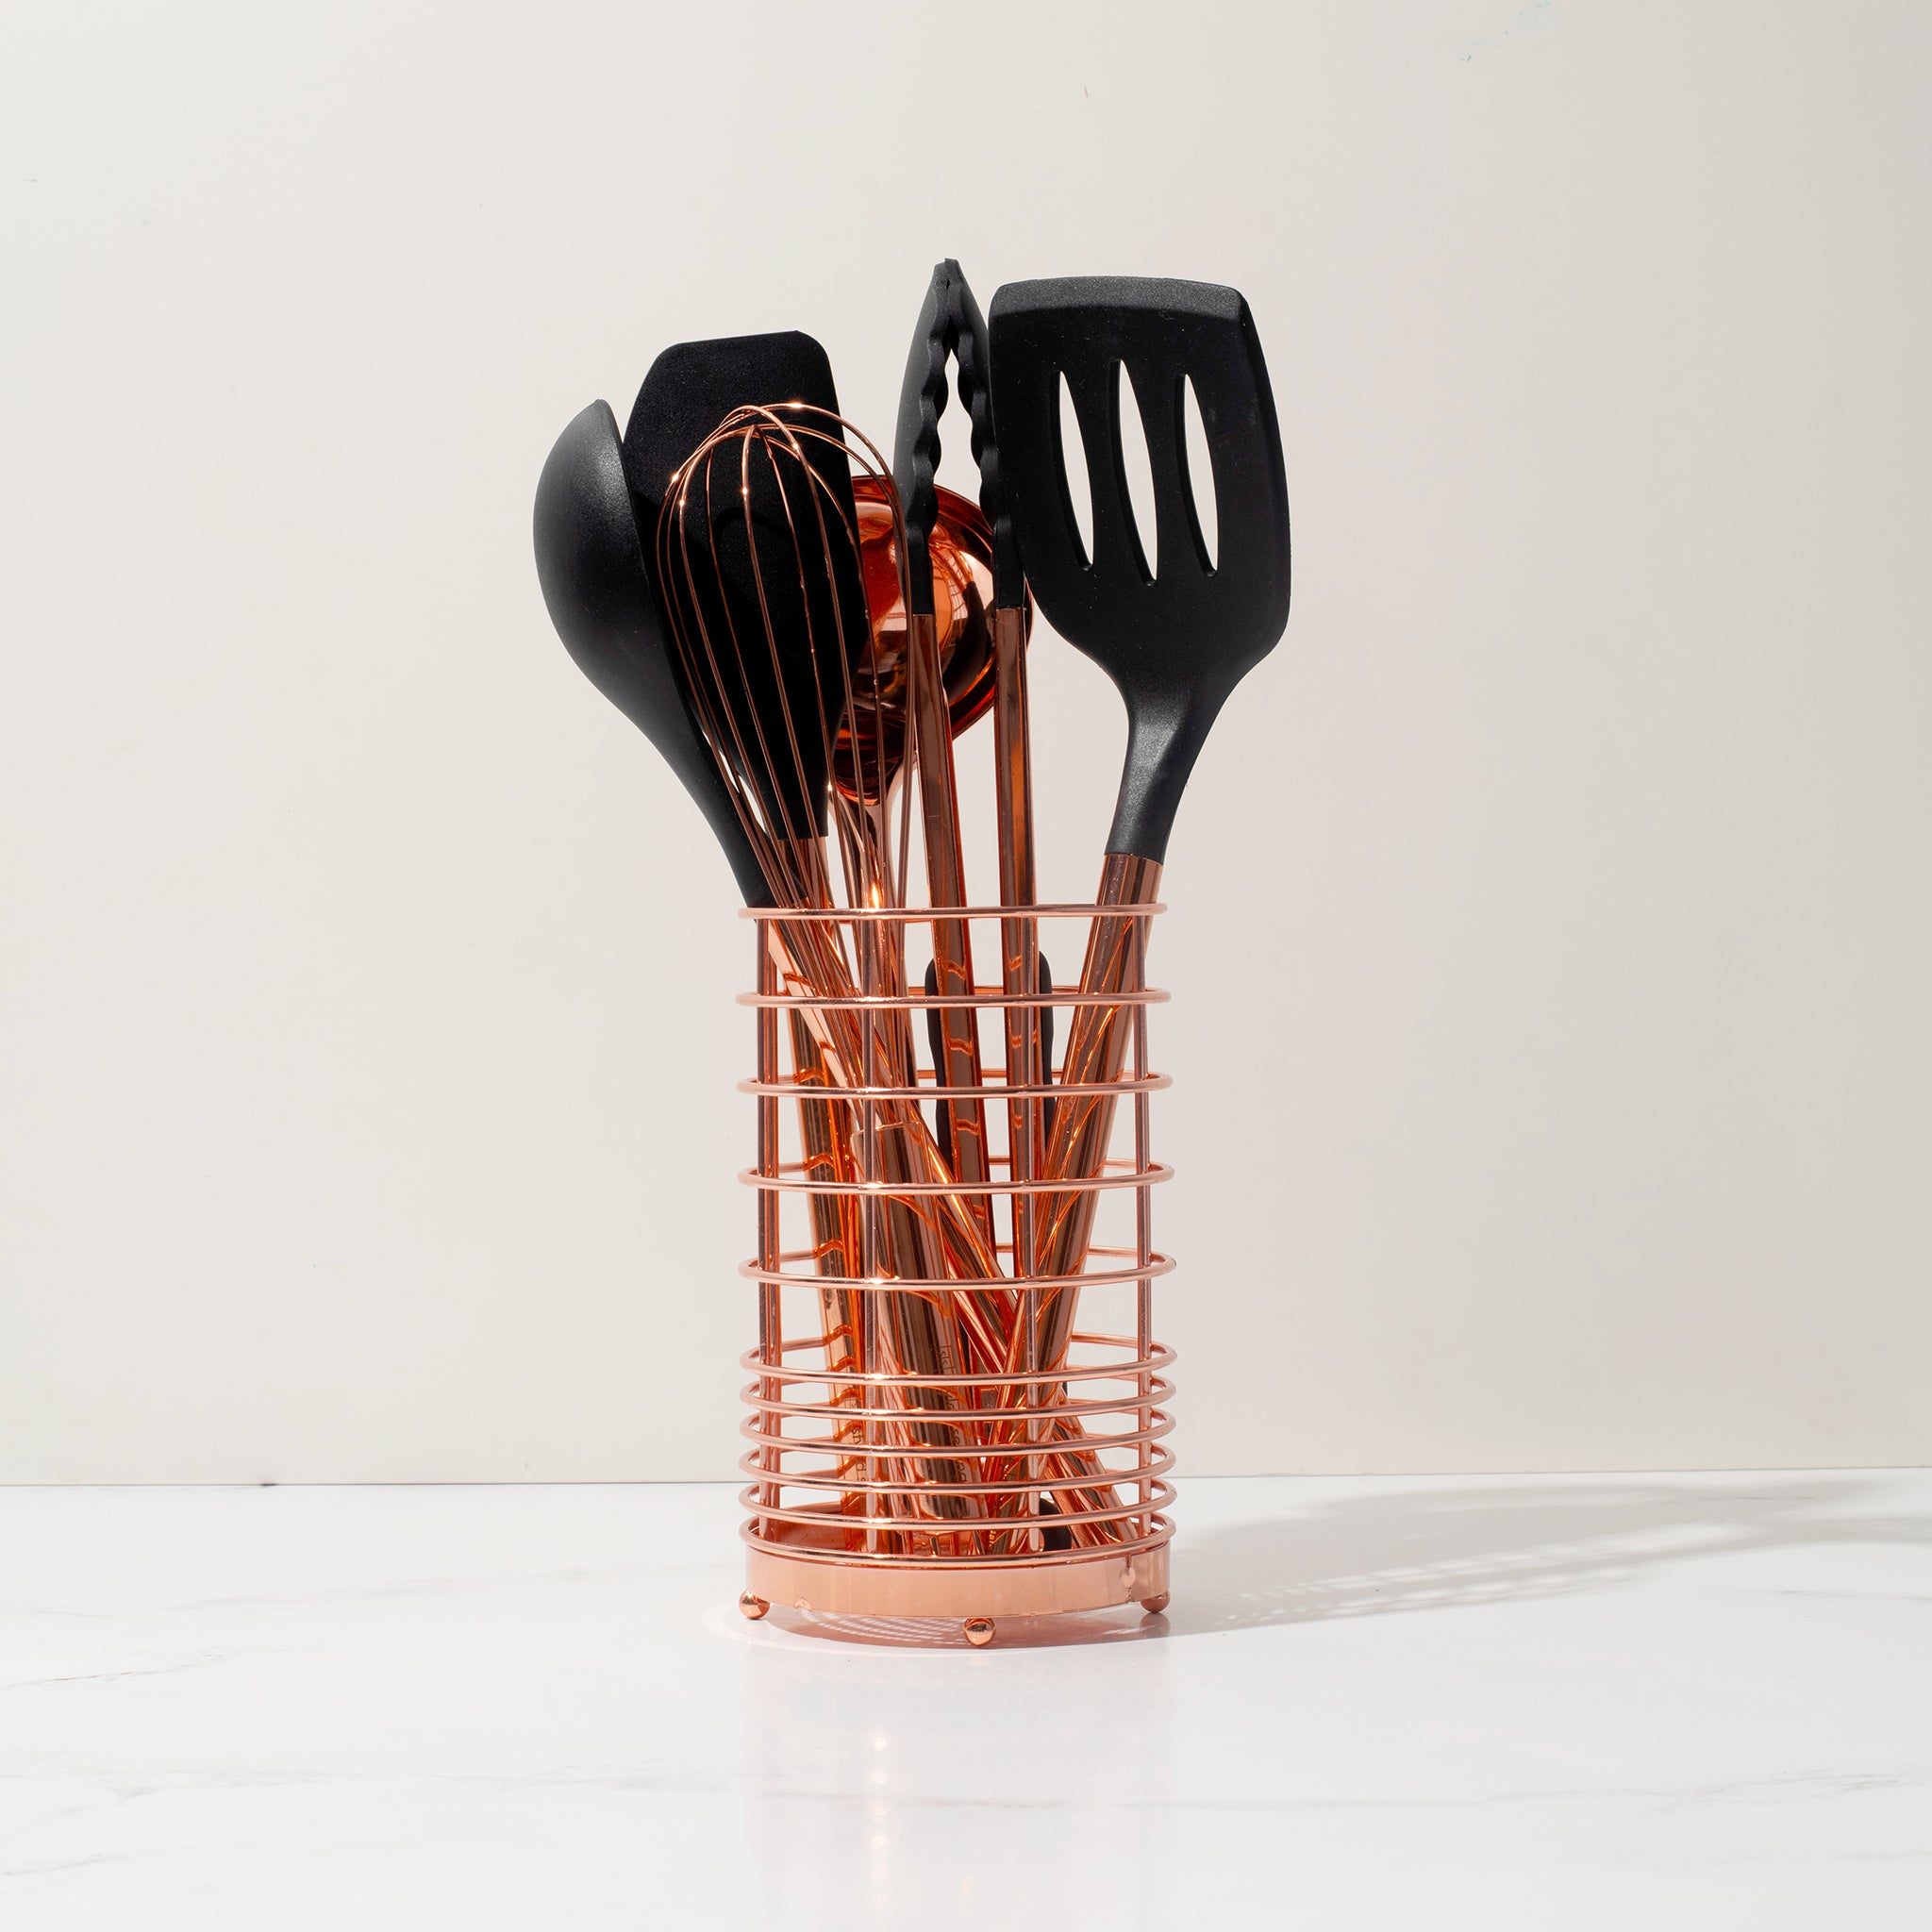 Copper and Black Kitchen Utensils Set with Holder - Styled Settings